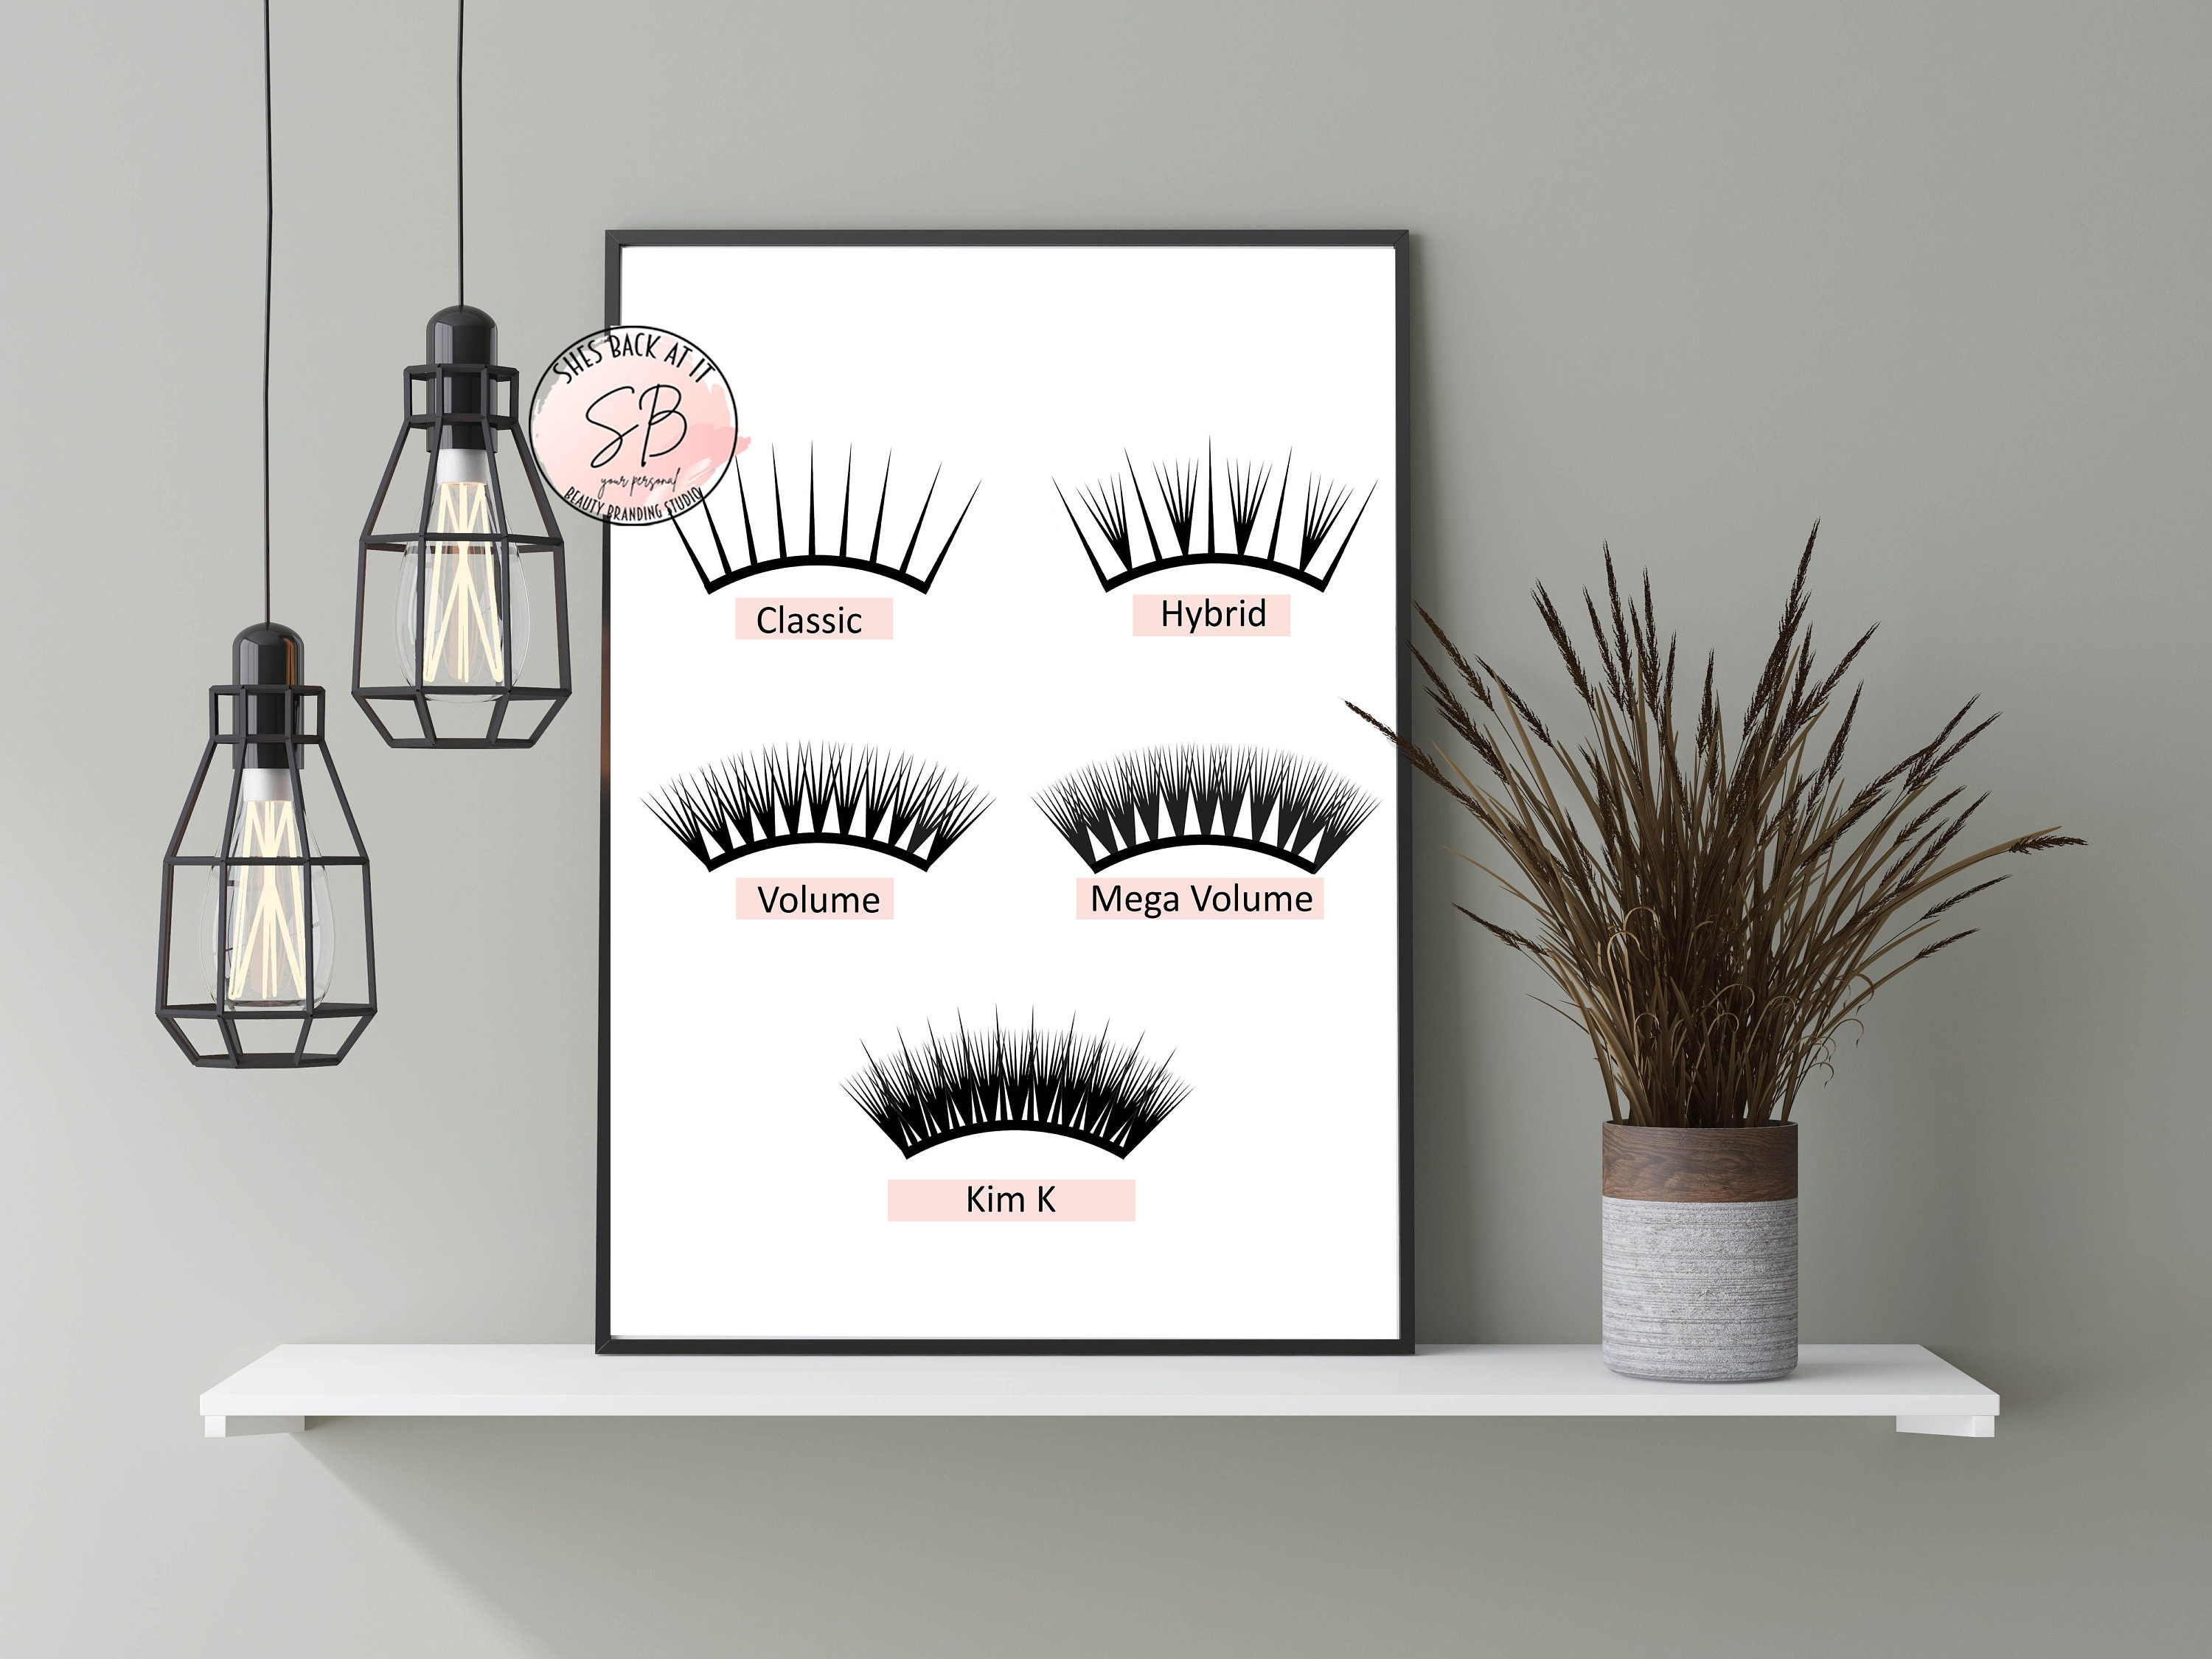 Lash Room Decor & More! on Instagram: “As big or small your space